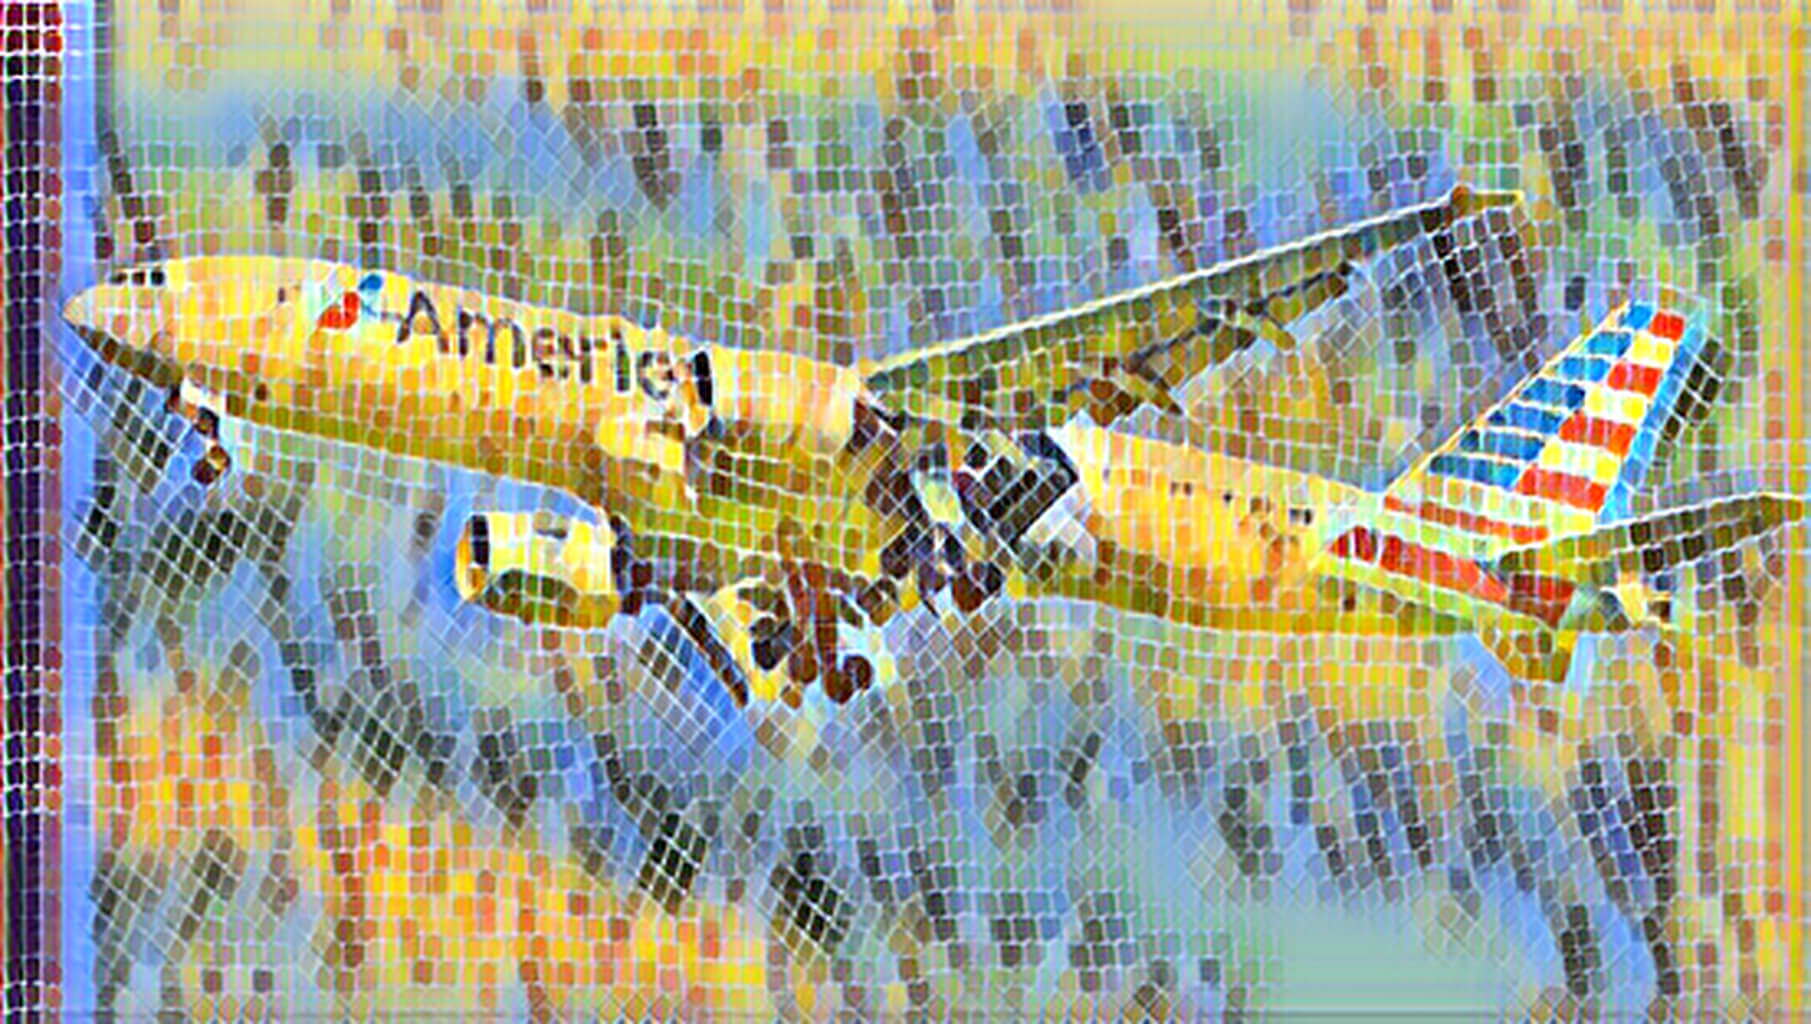  american airlines    3300  